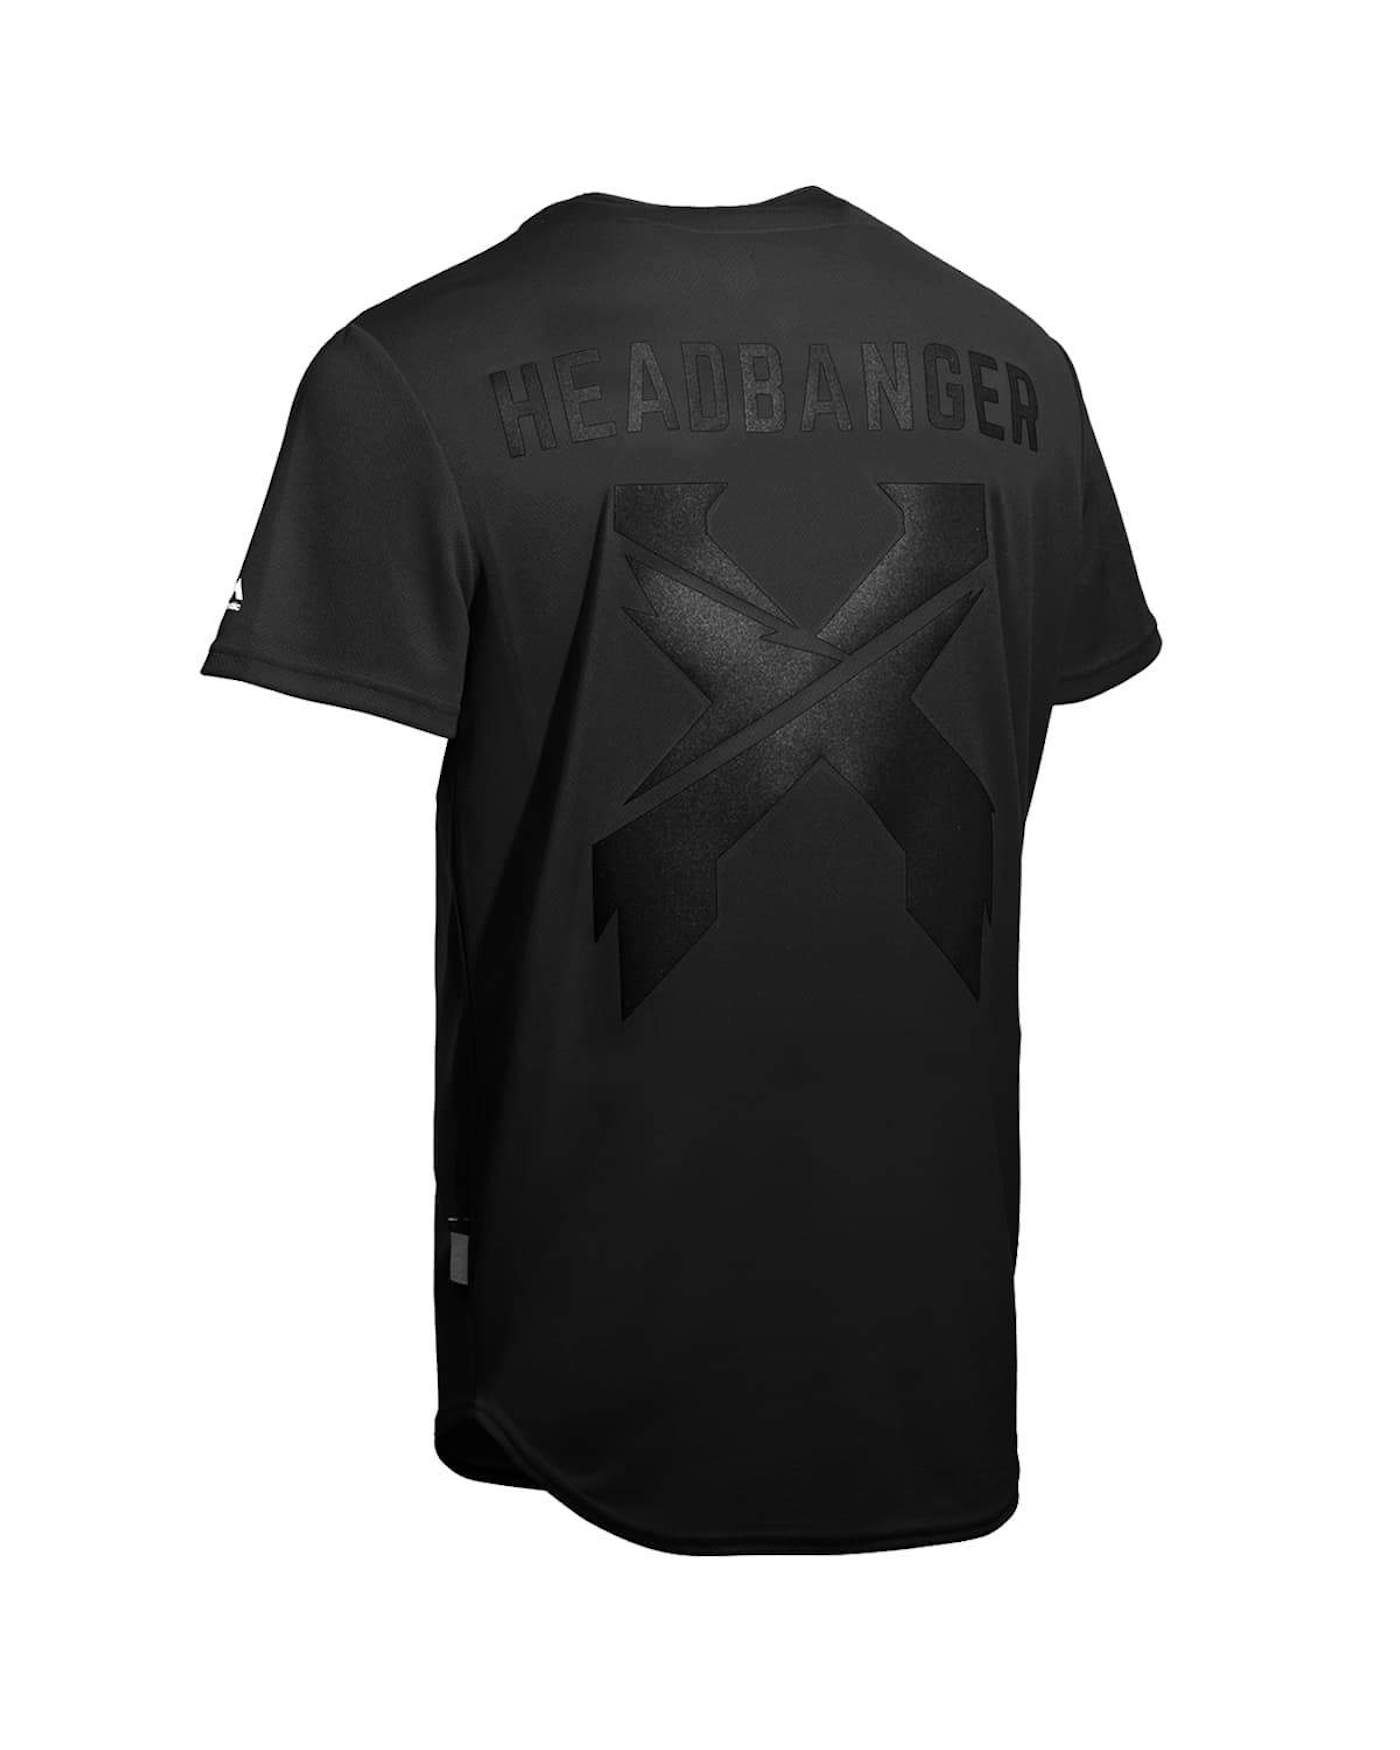 Official Excision Merch Headbanger Excision Baseball Jersey Tee